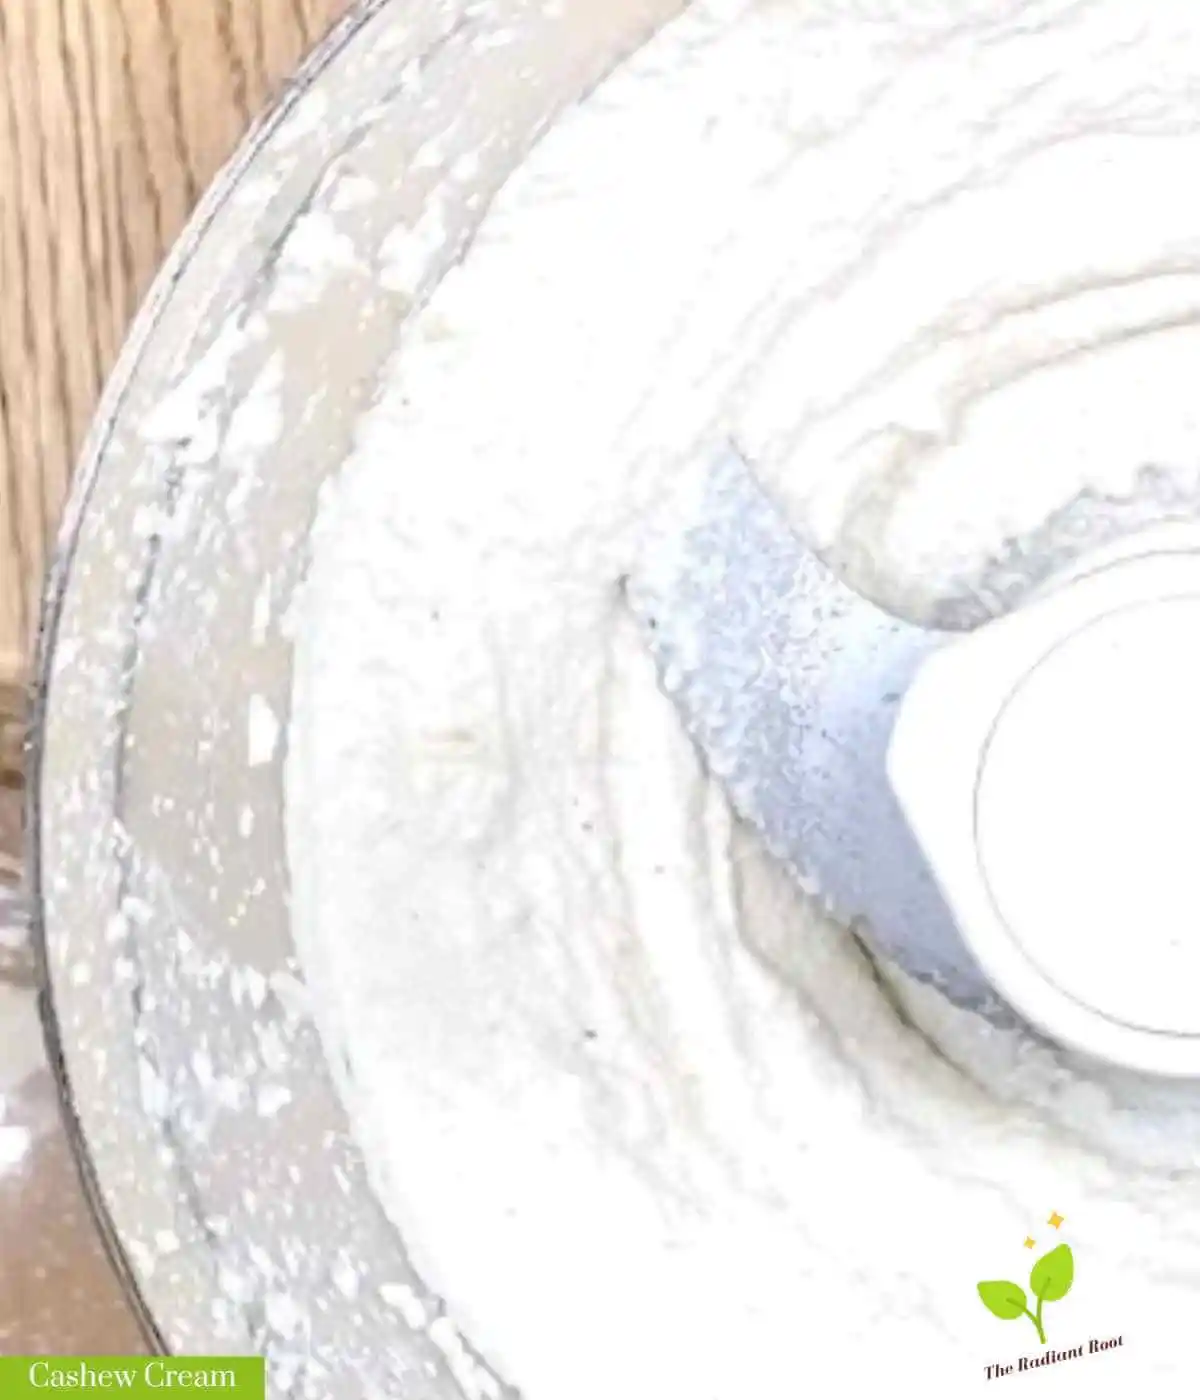 Cashew Cream mail photo: A close up image of a finished cashew cream in a food processor bowl with the words “cashew cream” in the bottom left corner. | cashew sauce recipe | The Radiant Root